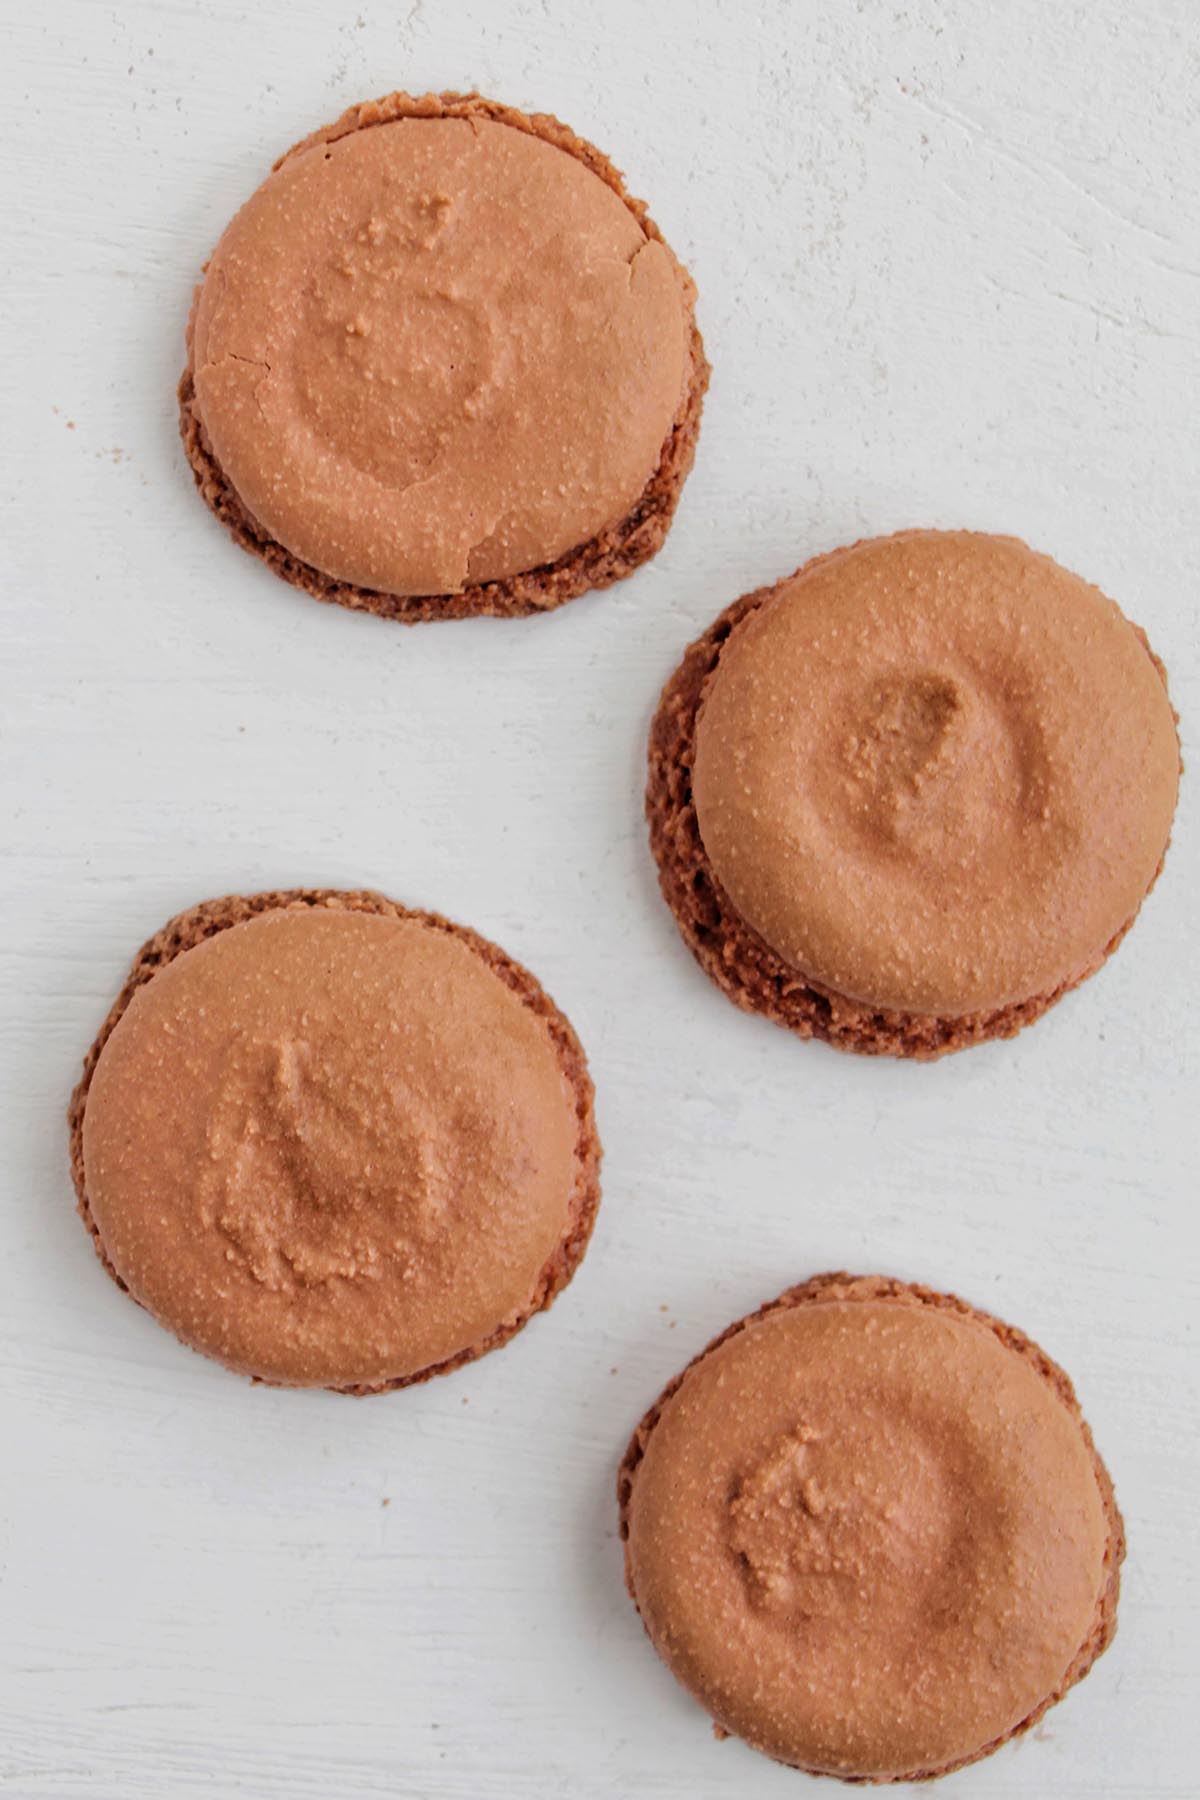 brown macaron shells with feet that spread.